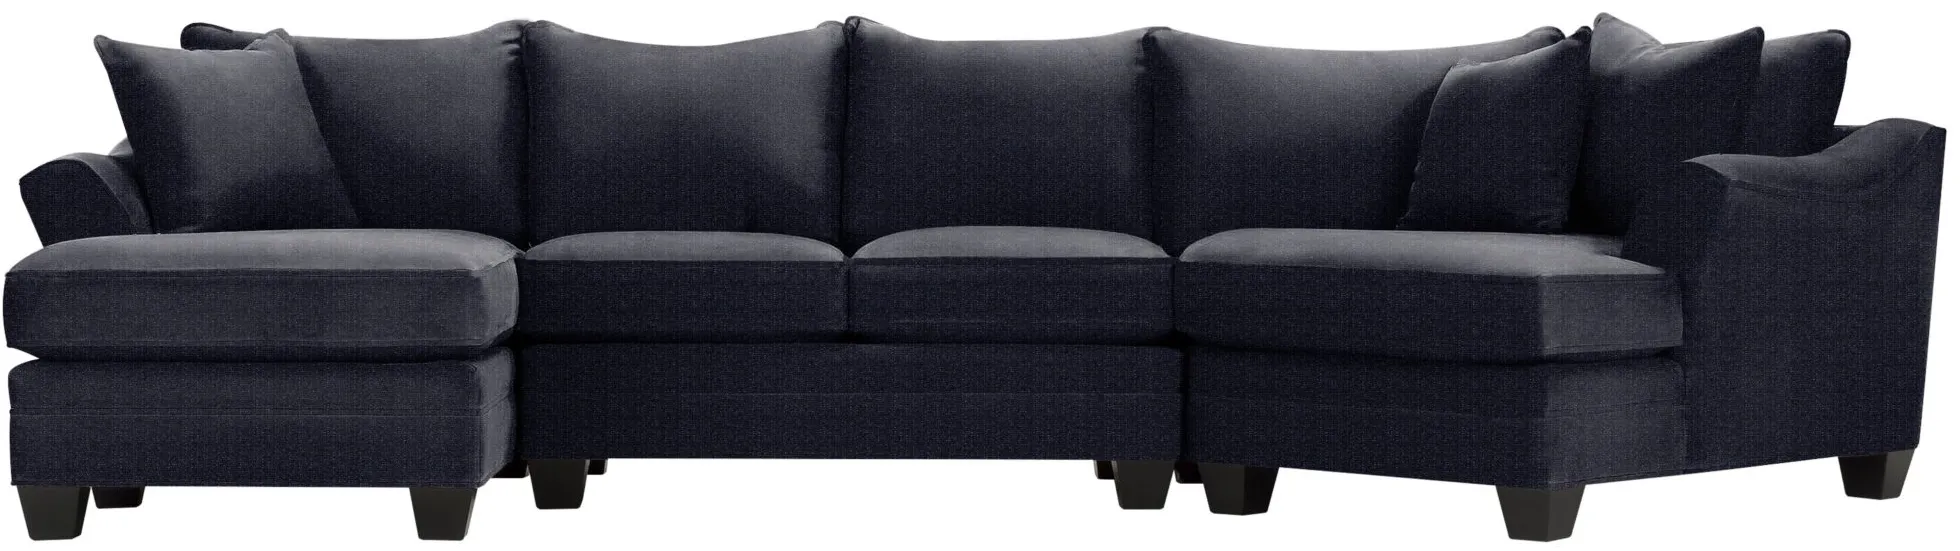 Foresthill 3-pc. Left Hand Facing Sectional Sofa in Sugar Shack Navy by H.M. Richards